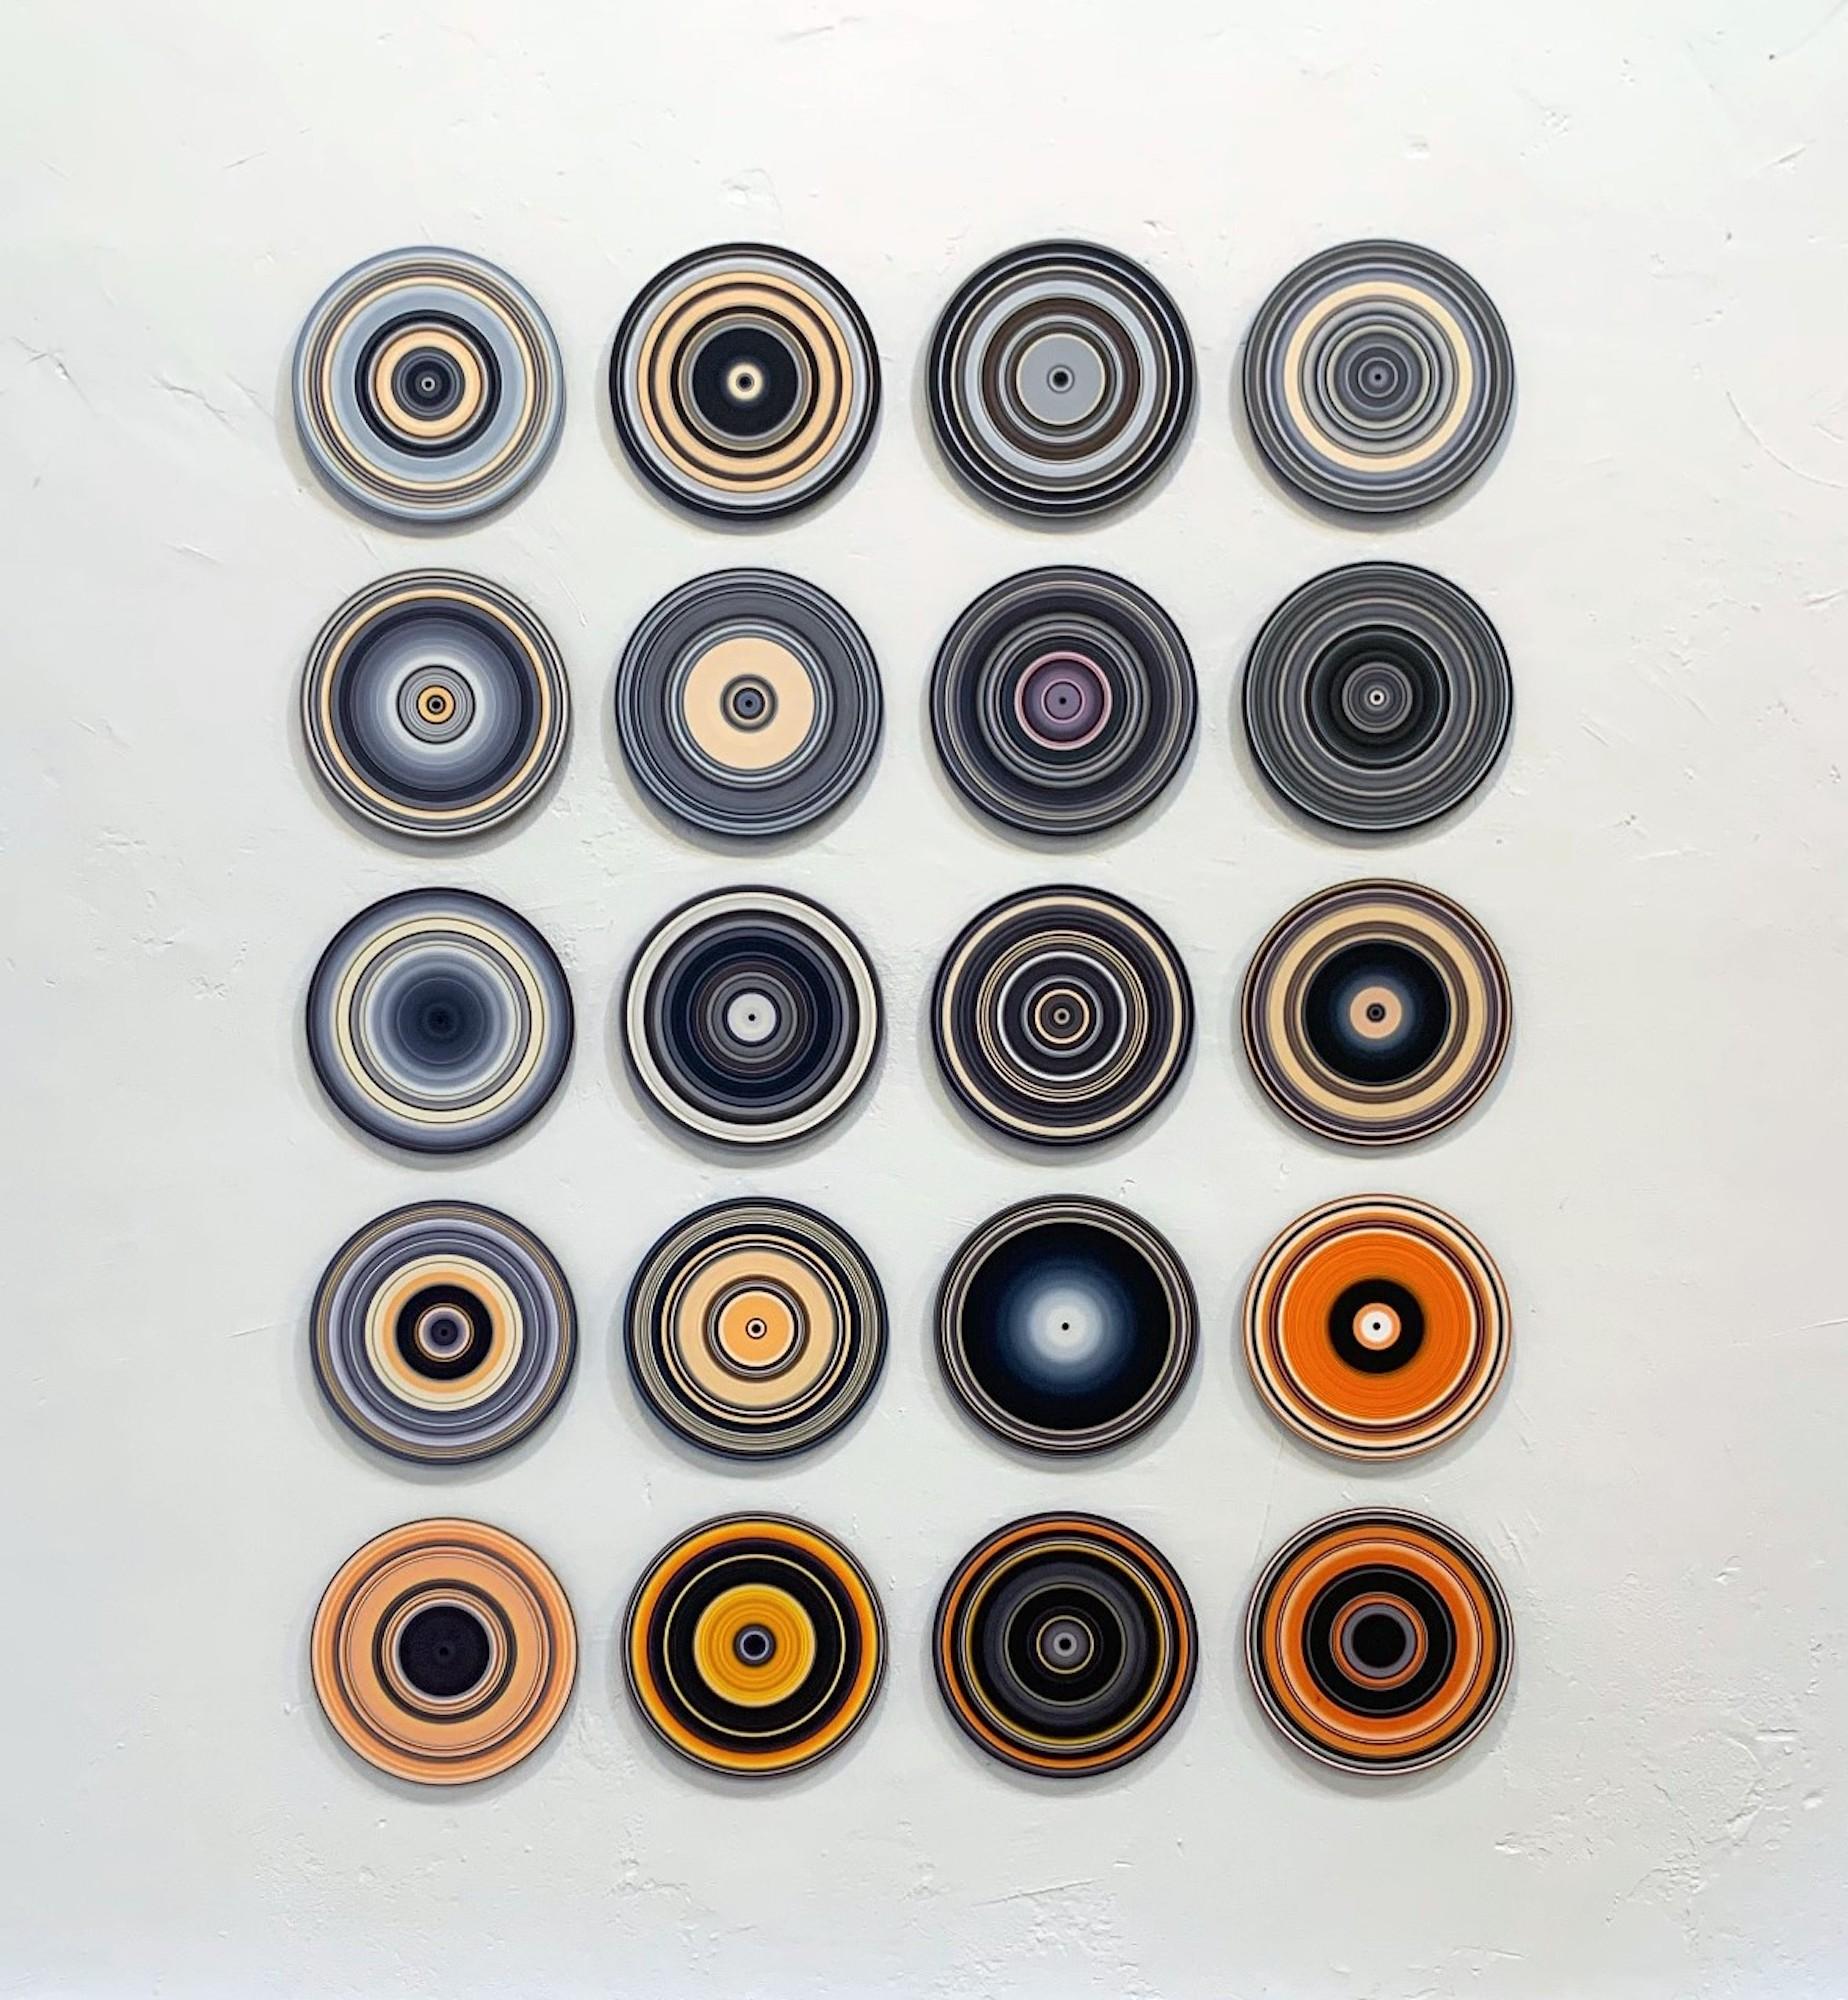 SOUND AND VISION – BlackWhiteOrange (Volume II) is a unique oil on vinyl installation by German contemporary artist Doris Marten, dimensions are 170 × 135 cm (66.9 × 53.1 in). Every piece is 30 cm in diameter (11.8 in).
The artwork is signed, sold